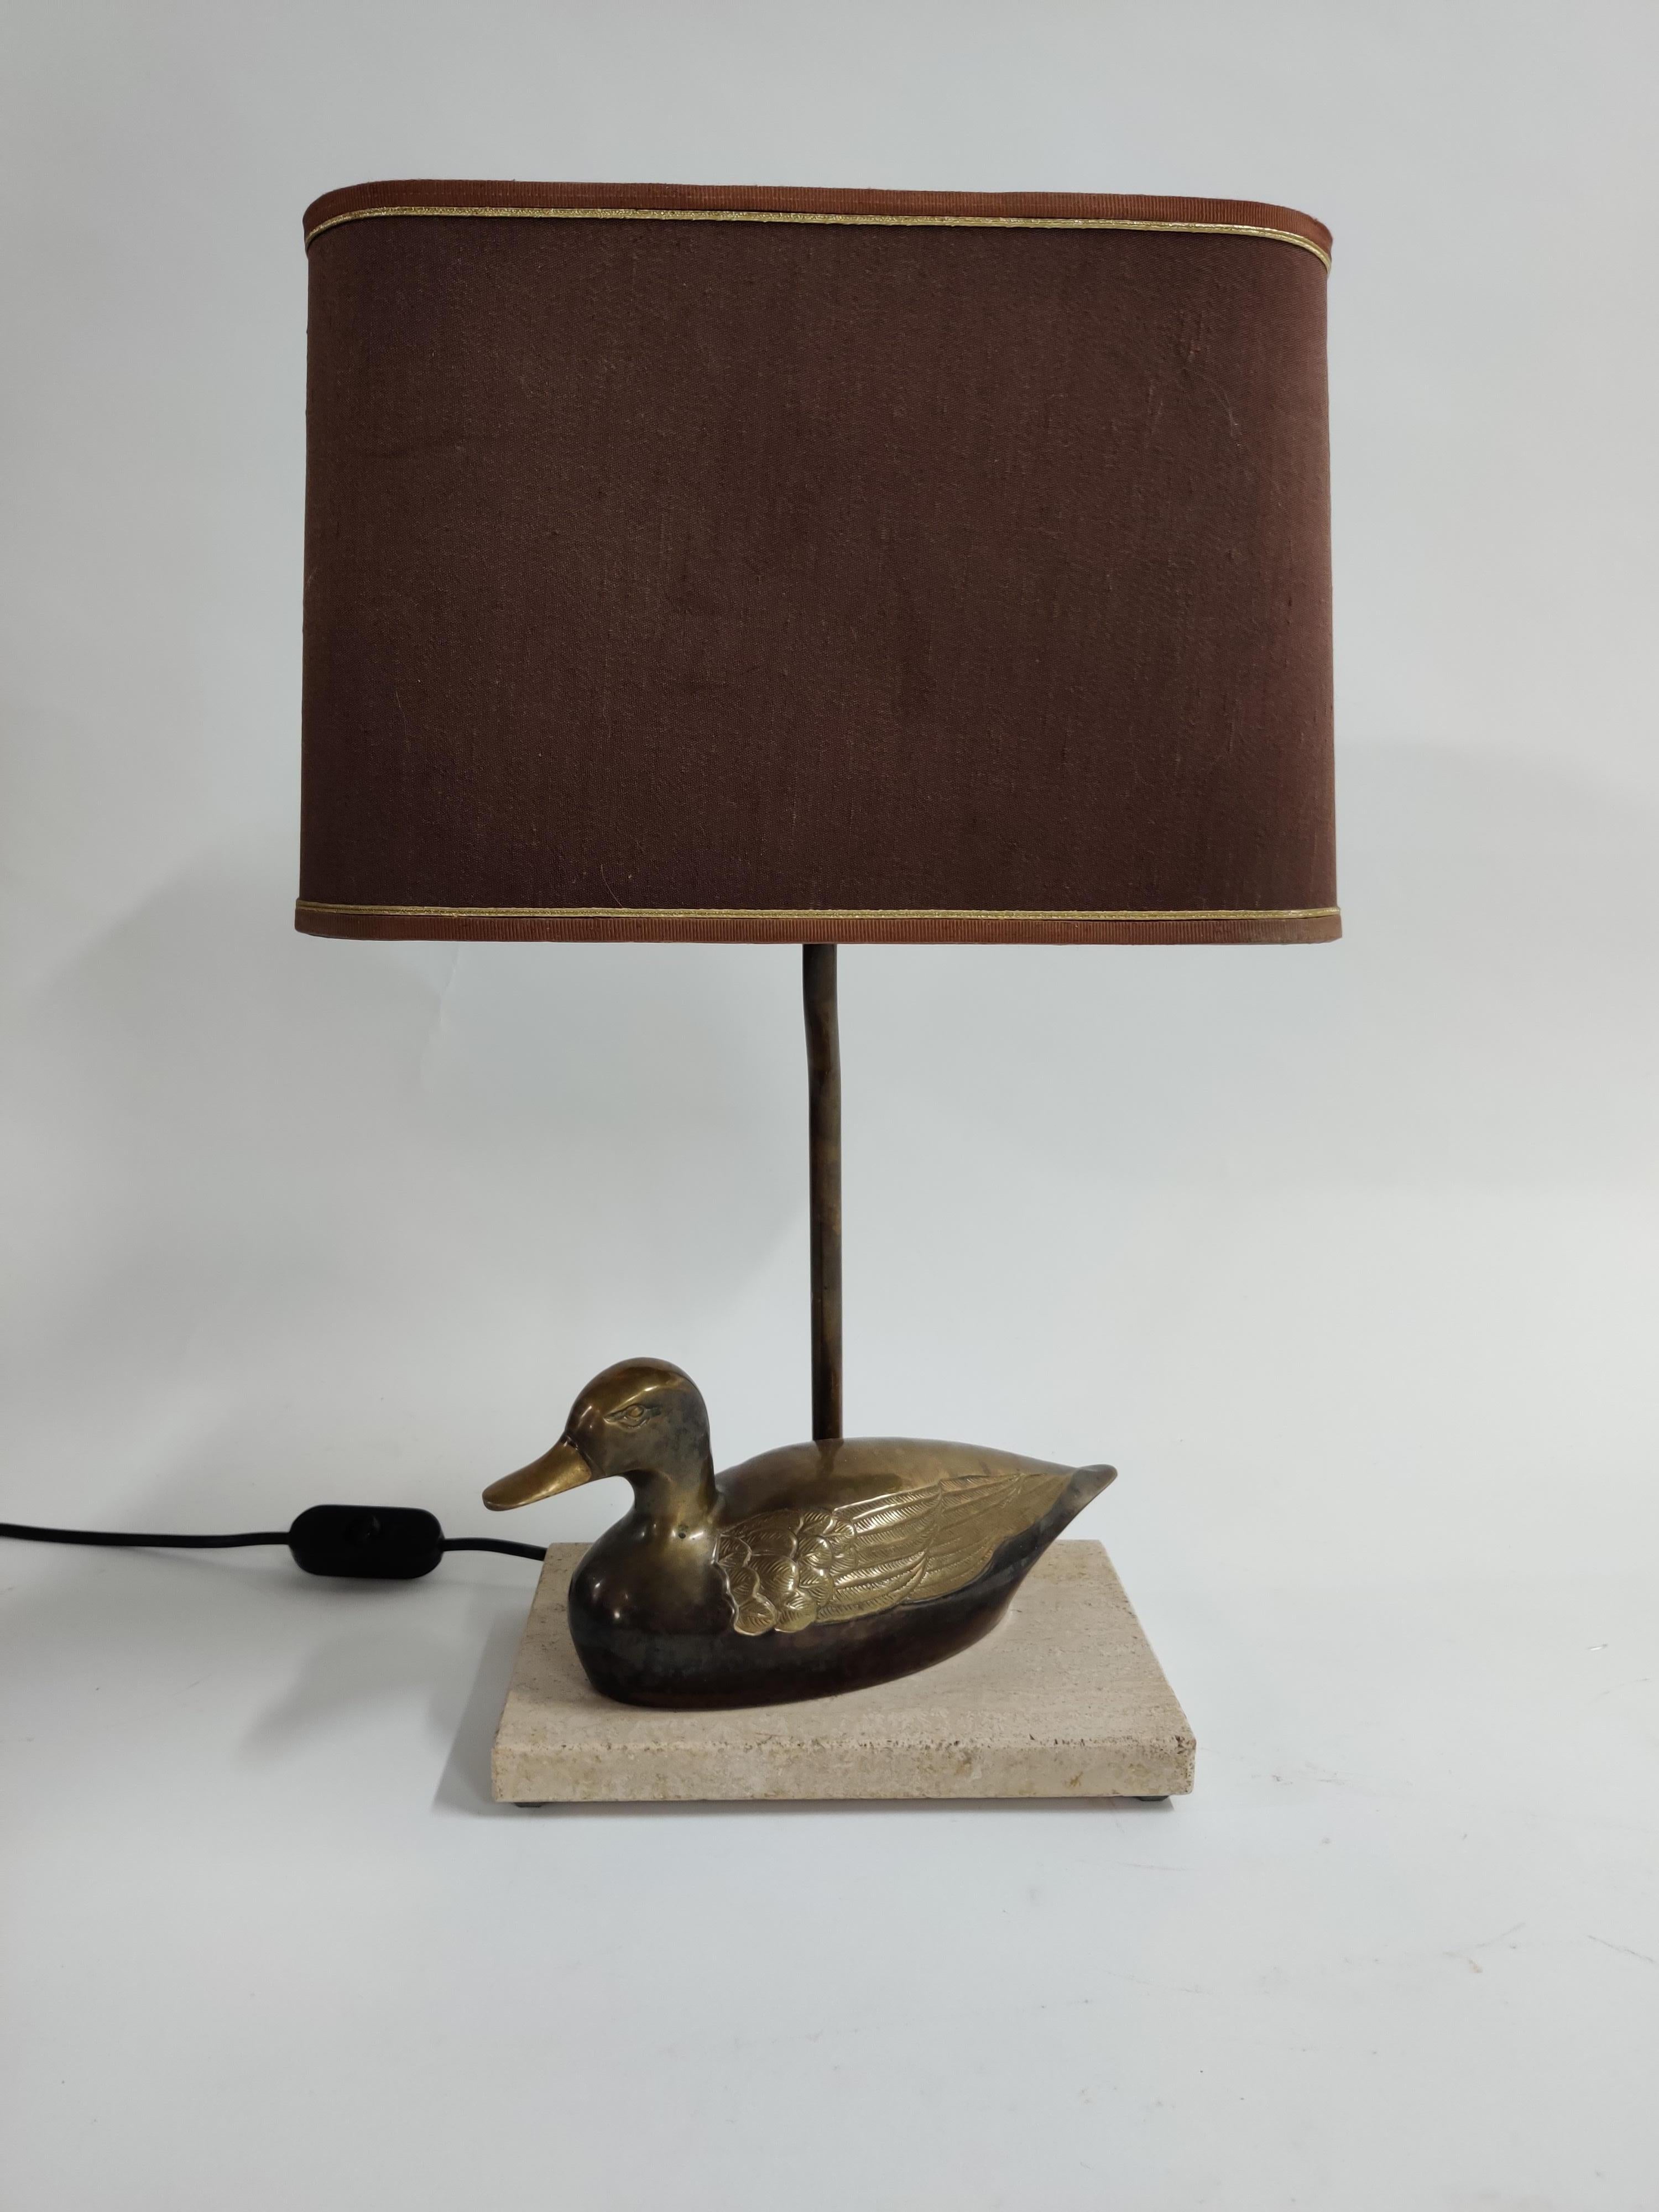 Brass duck table lamp which is mounted on beige travertine base. 

Unique piece. This lamp emits a very warm light, 

1970s, France

Very good condition, no damages.

Delivered with the original shade.

Dimensions:
Height: